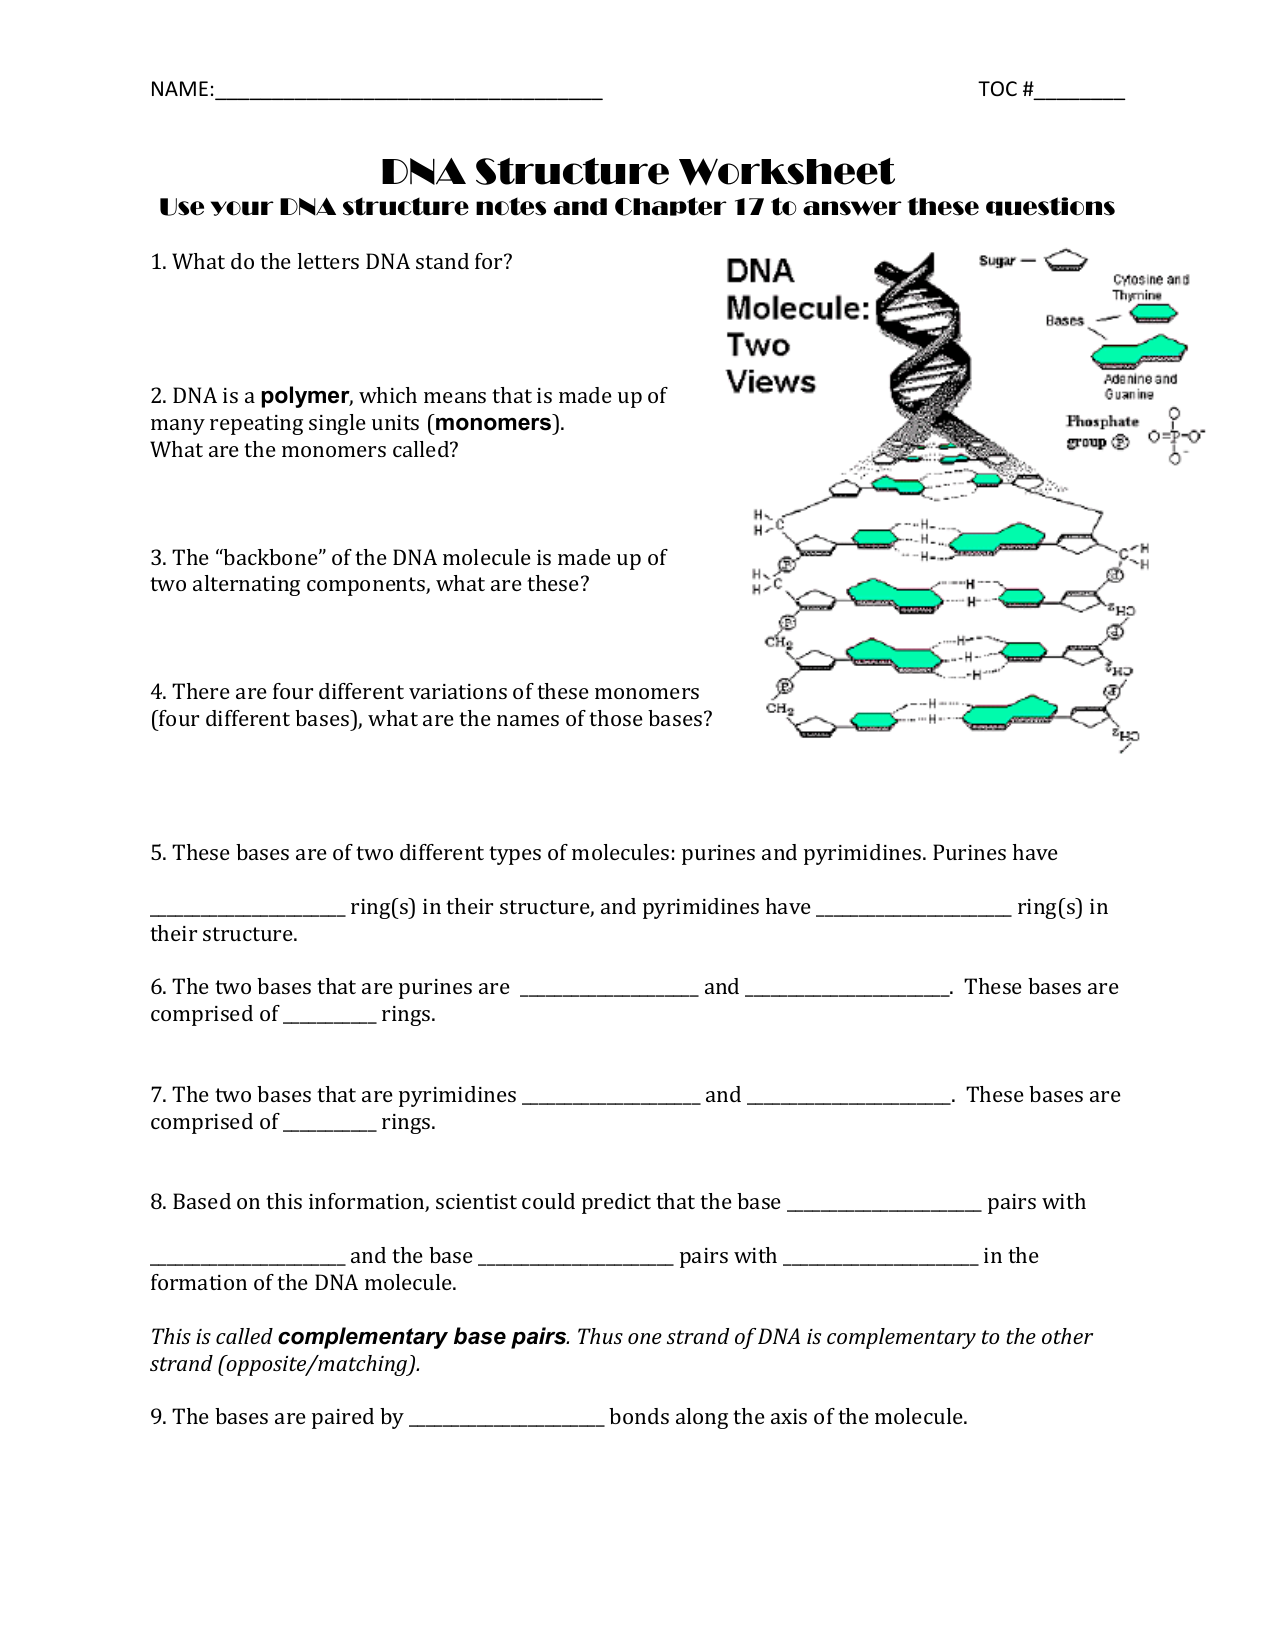 DIAGRAM] Introduction To Genetics Vocabulary Review Labeling Intended For Dna Base Pairing Worksheet Answers